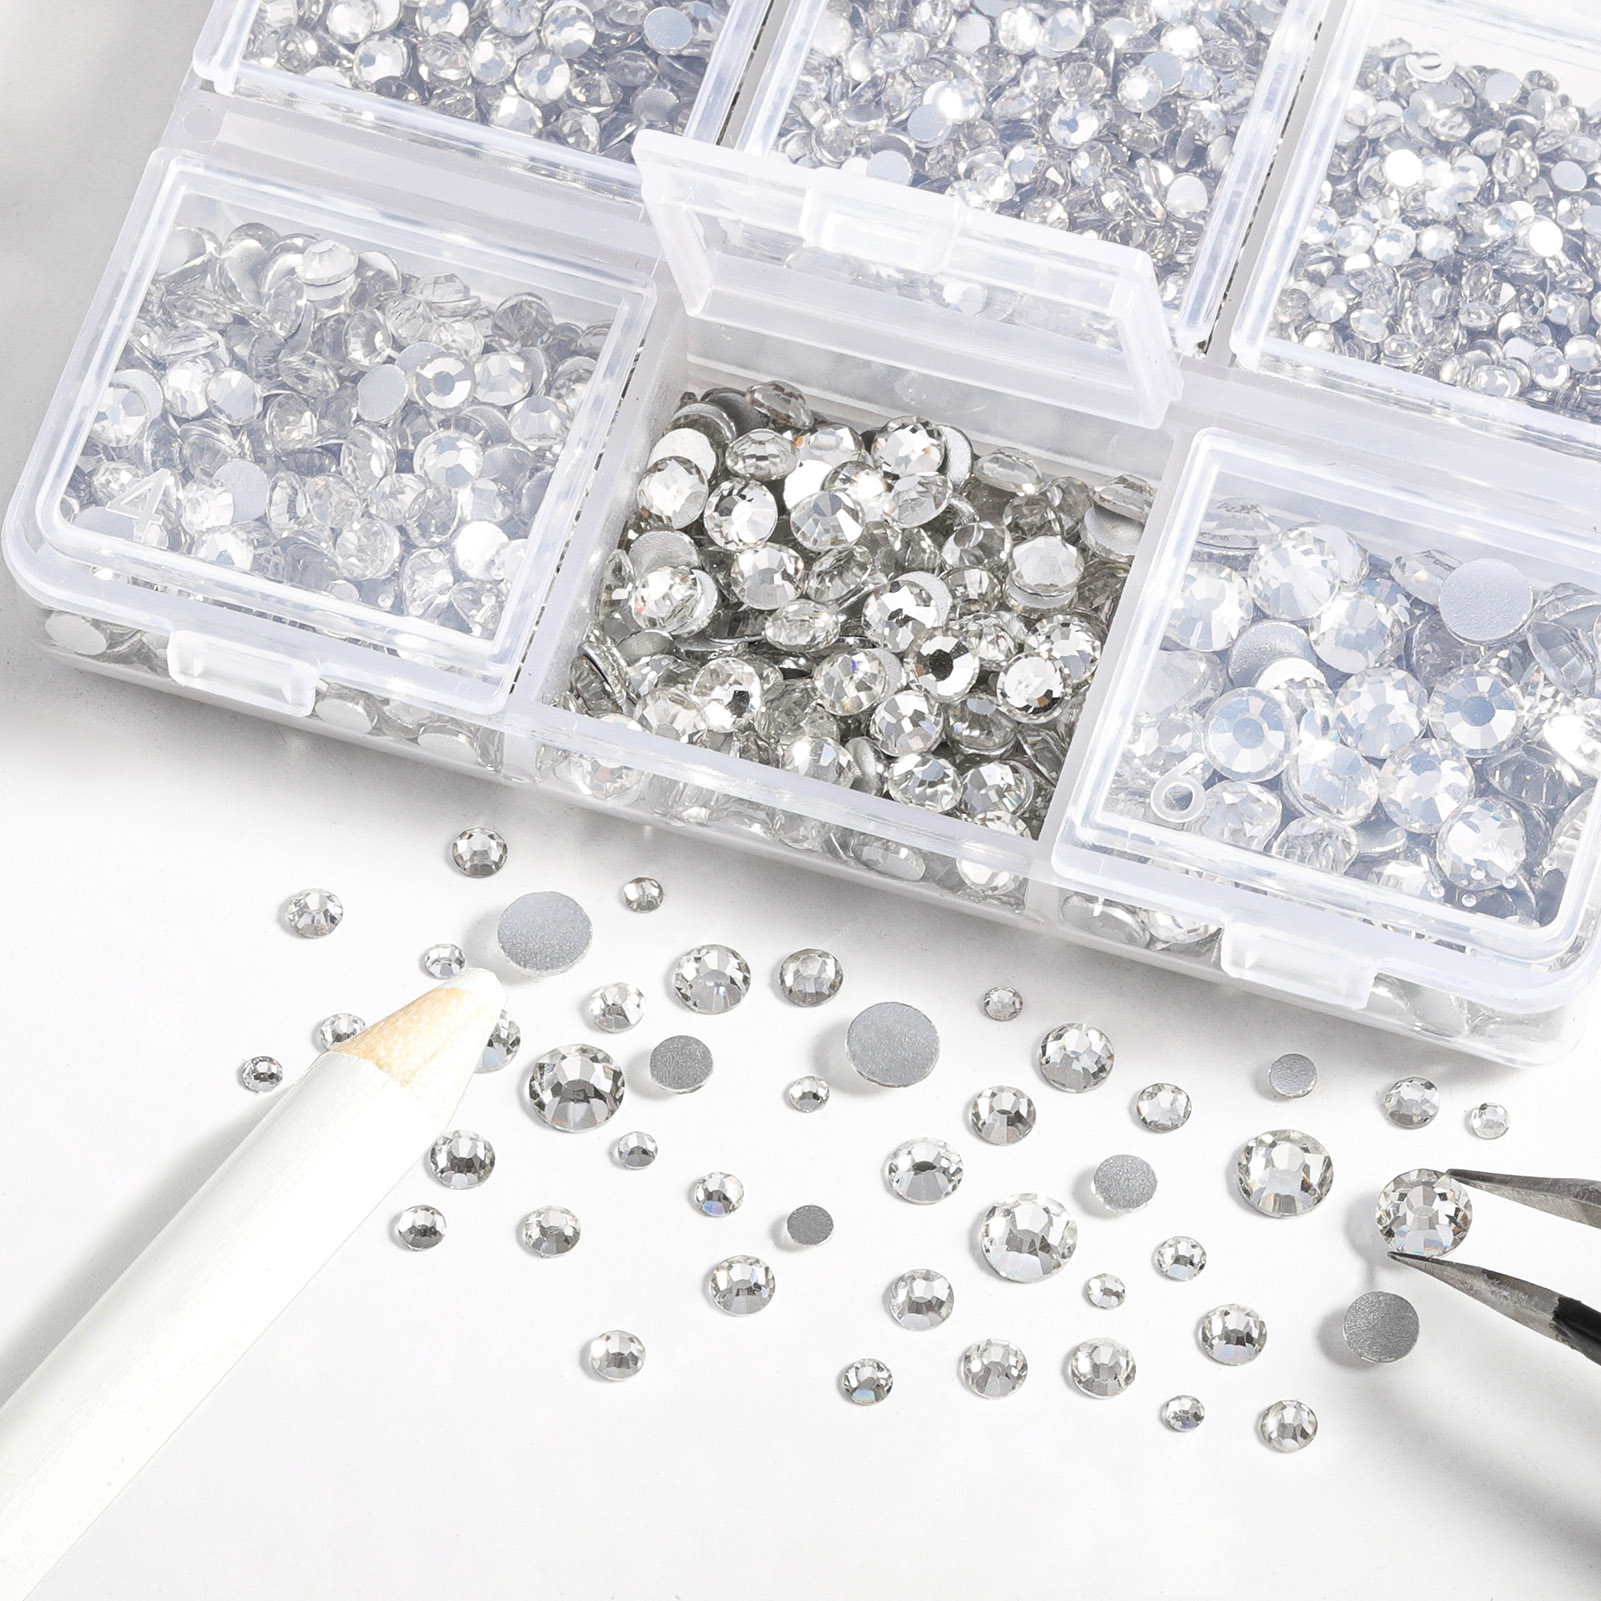 BEADSLAND 4300pcs Flatback Clear Rhinestones for Crafts, 6 Sizes, SS6-SS20,  Crystal